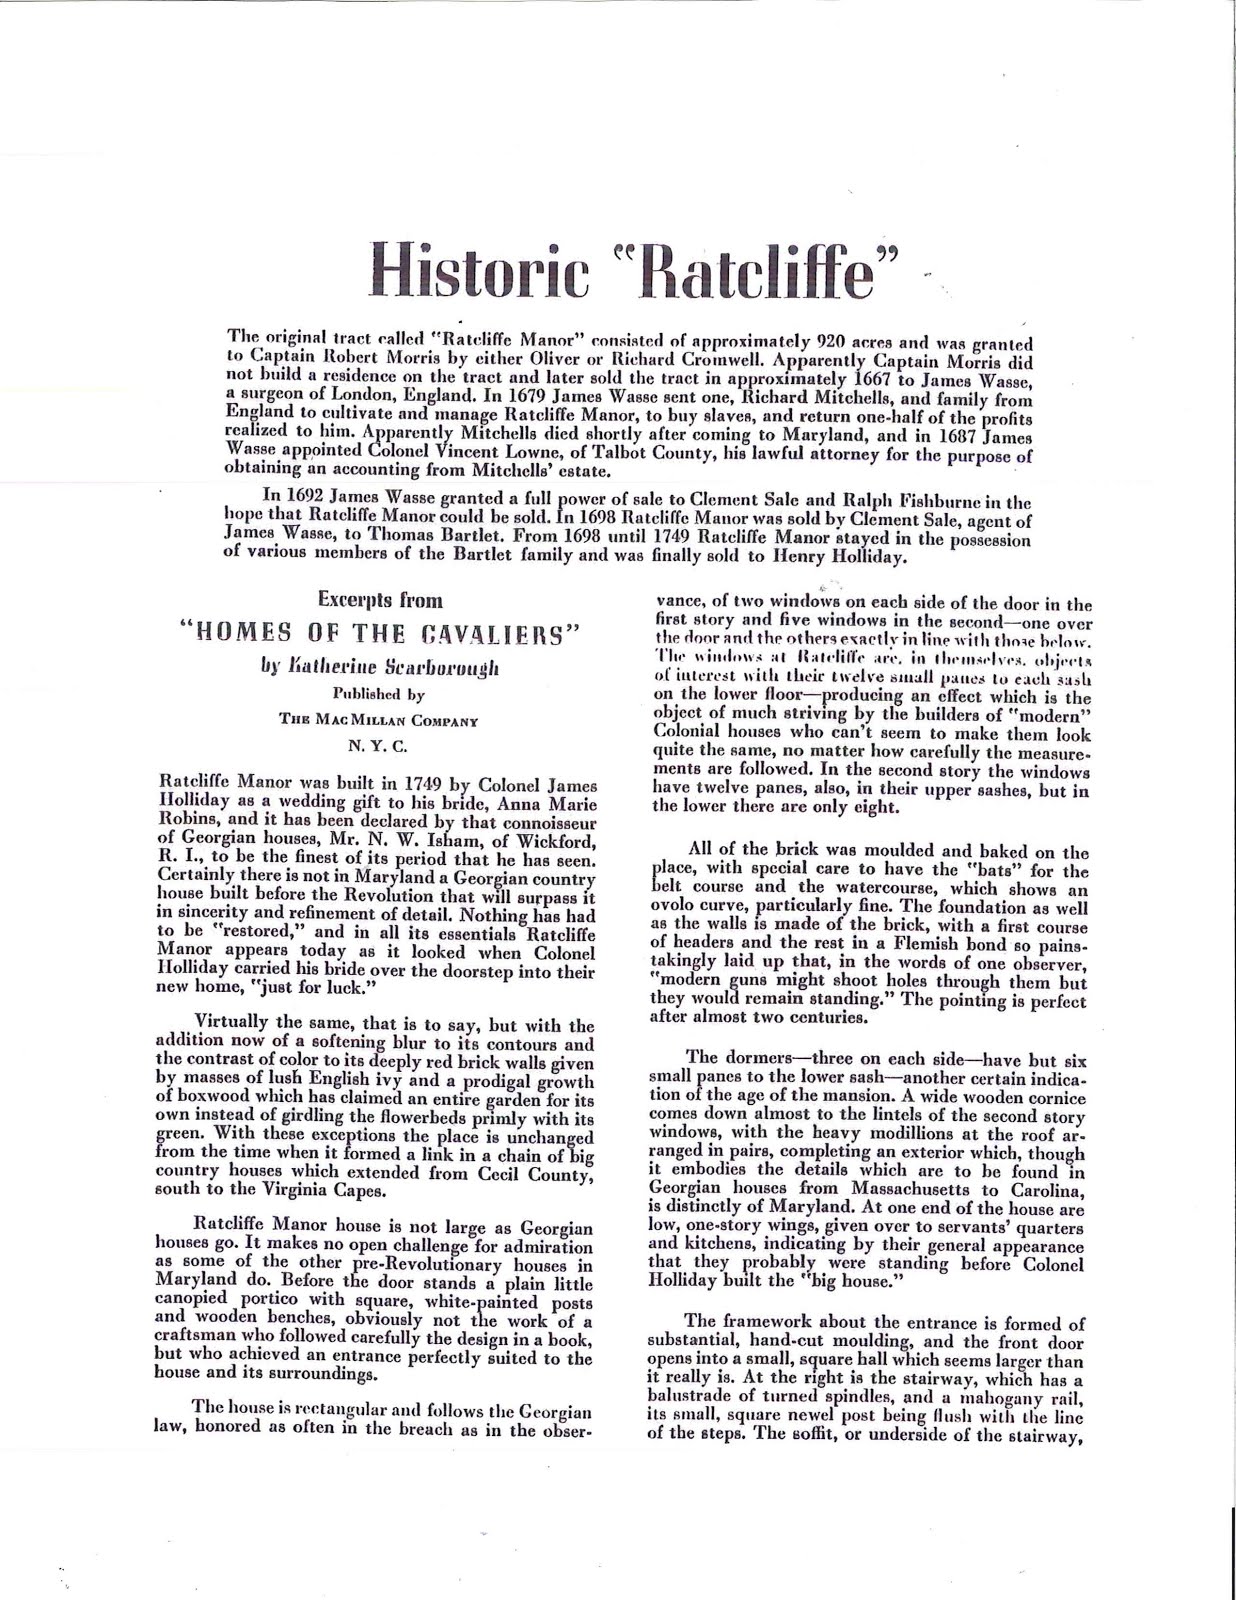 History of Ratcliffe